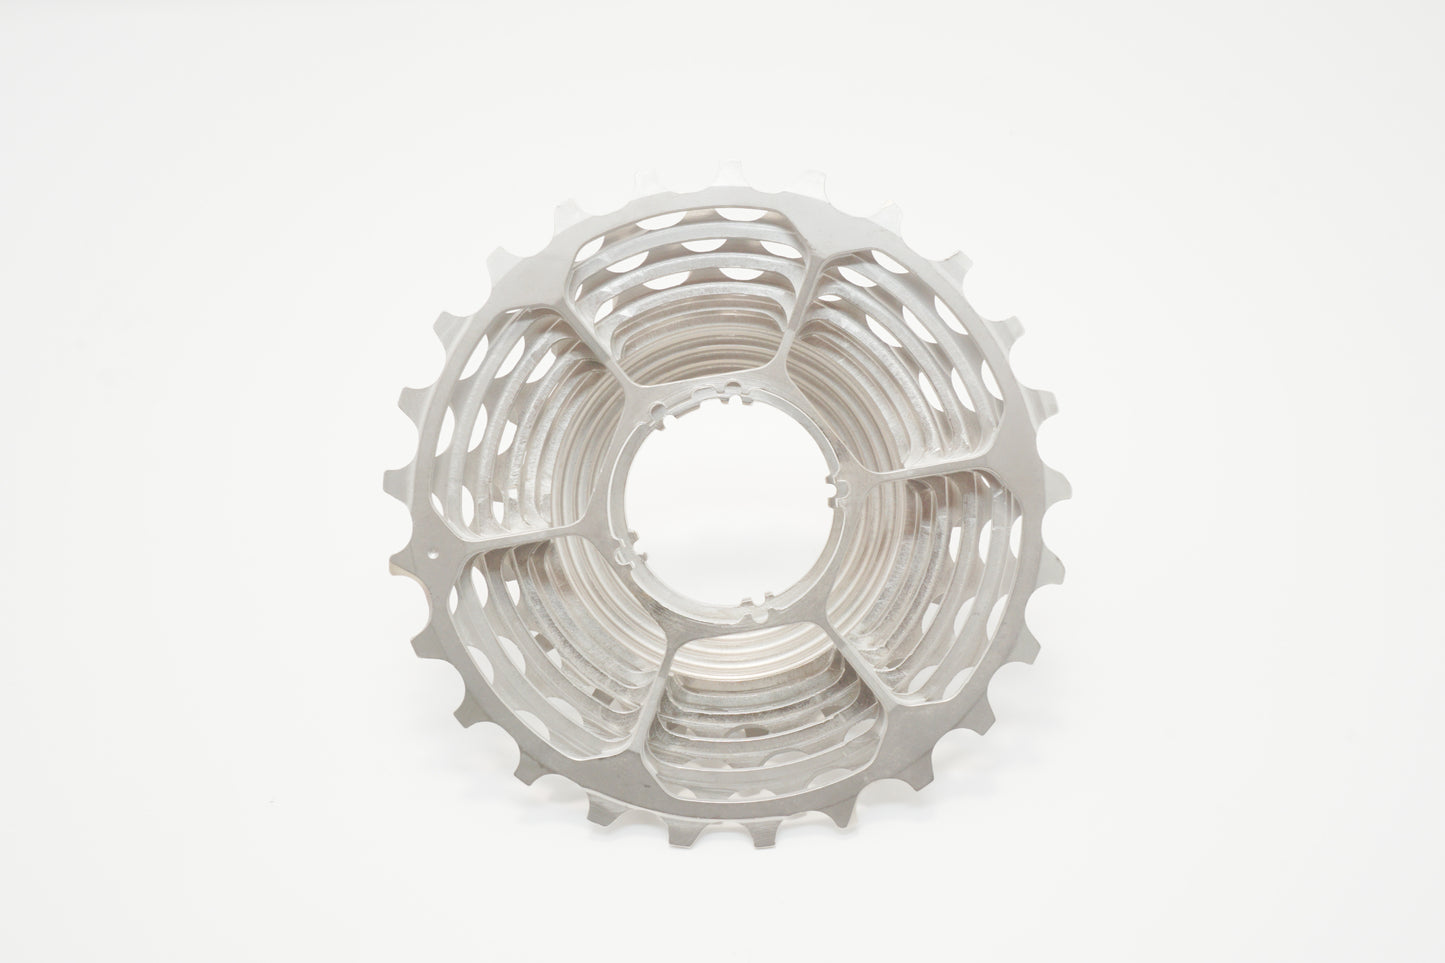 Prestacycle UniBlock PRO Cassette - 11-Speed for Campagnolo / Shimano / SRAM on Campagnolo 9-12 Freehub